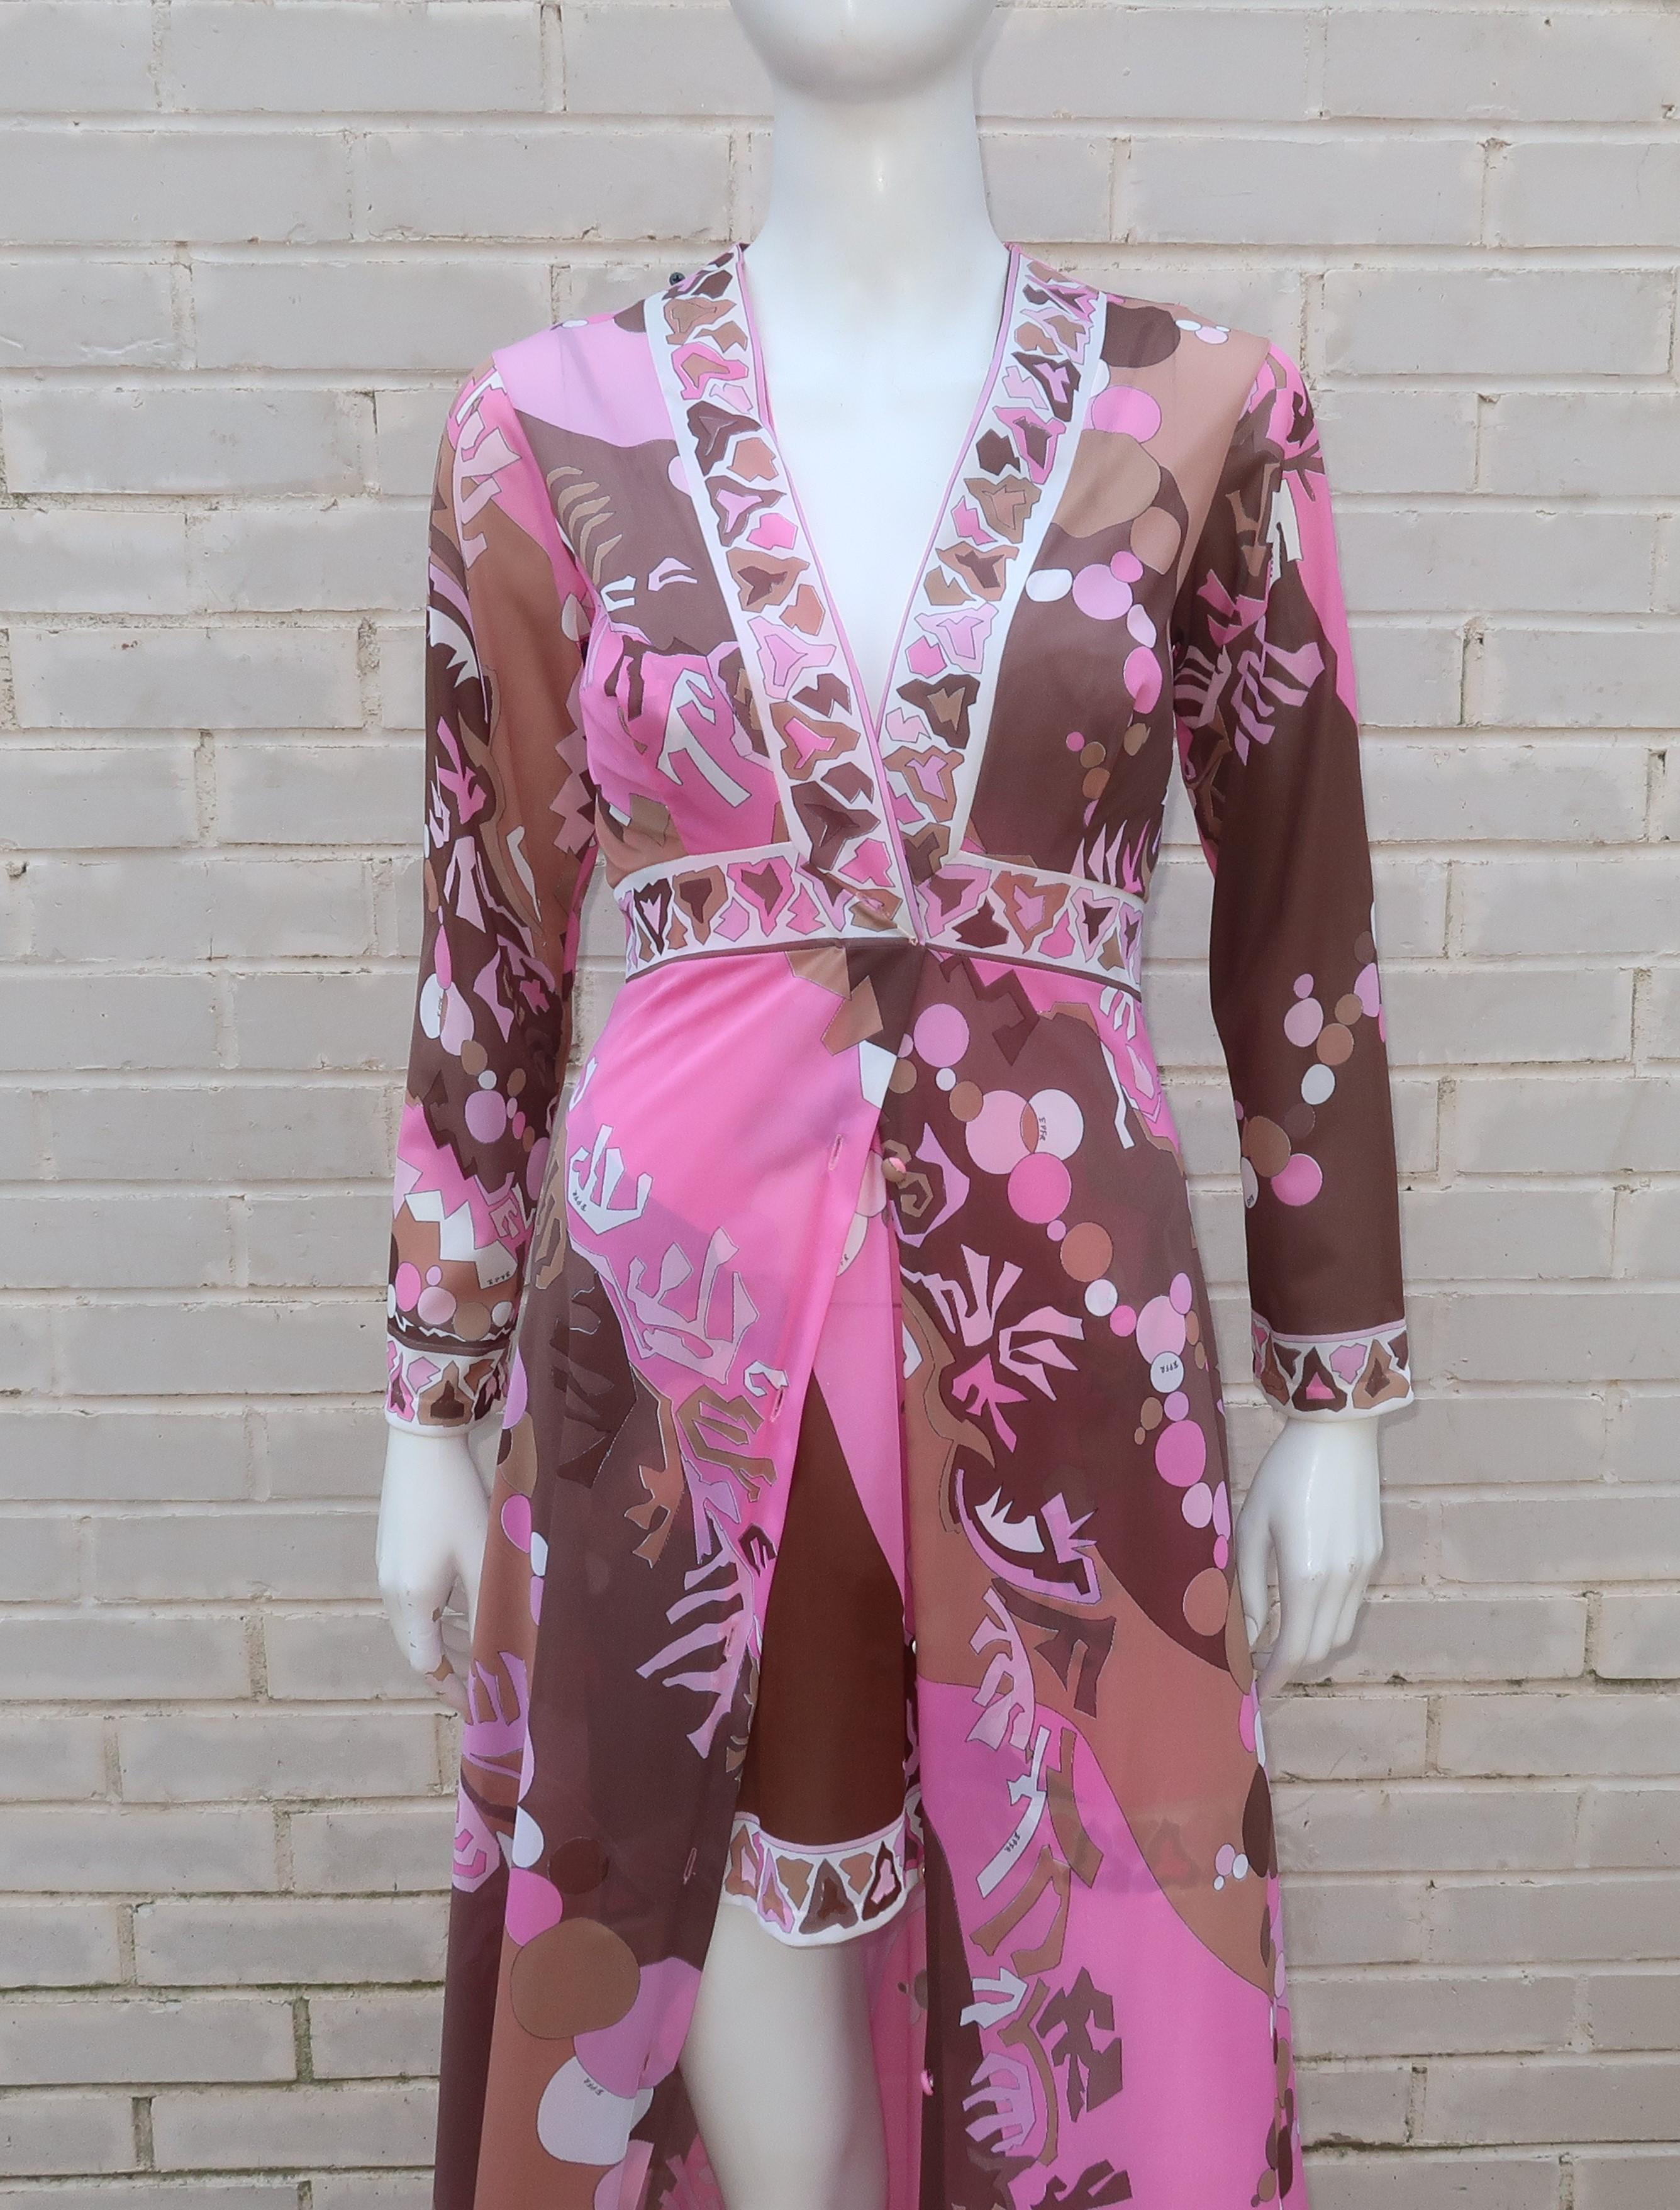 Emilio Pucci, the king of psychedelic prints, collaborated in the 1960's with Formfit Rogers to produce lingerie and hostess wear with his signature mod style.  This peignoir set consisting of a short nightgown and coordinating robe is made from